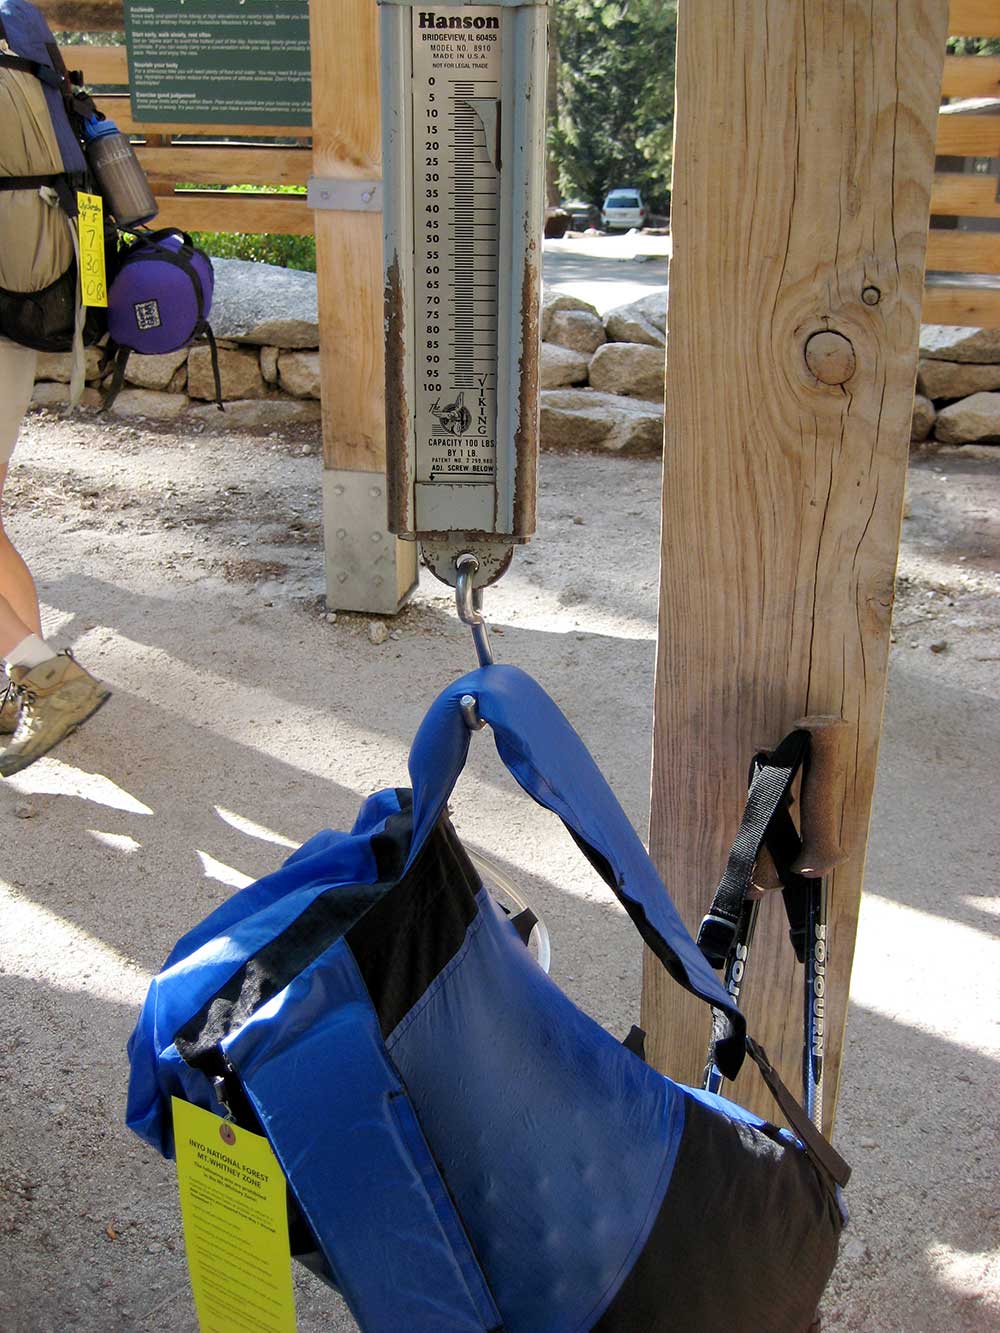 The weigh-in before starting the 14,505-foot summit of Mt. Whitney in California. The author carried 7 pounds total in his Gossamer Gear pack with food and some water, as there was water along the way.